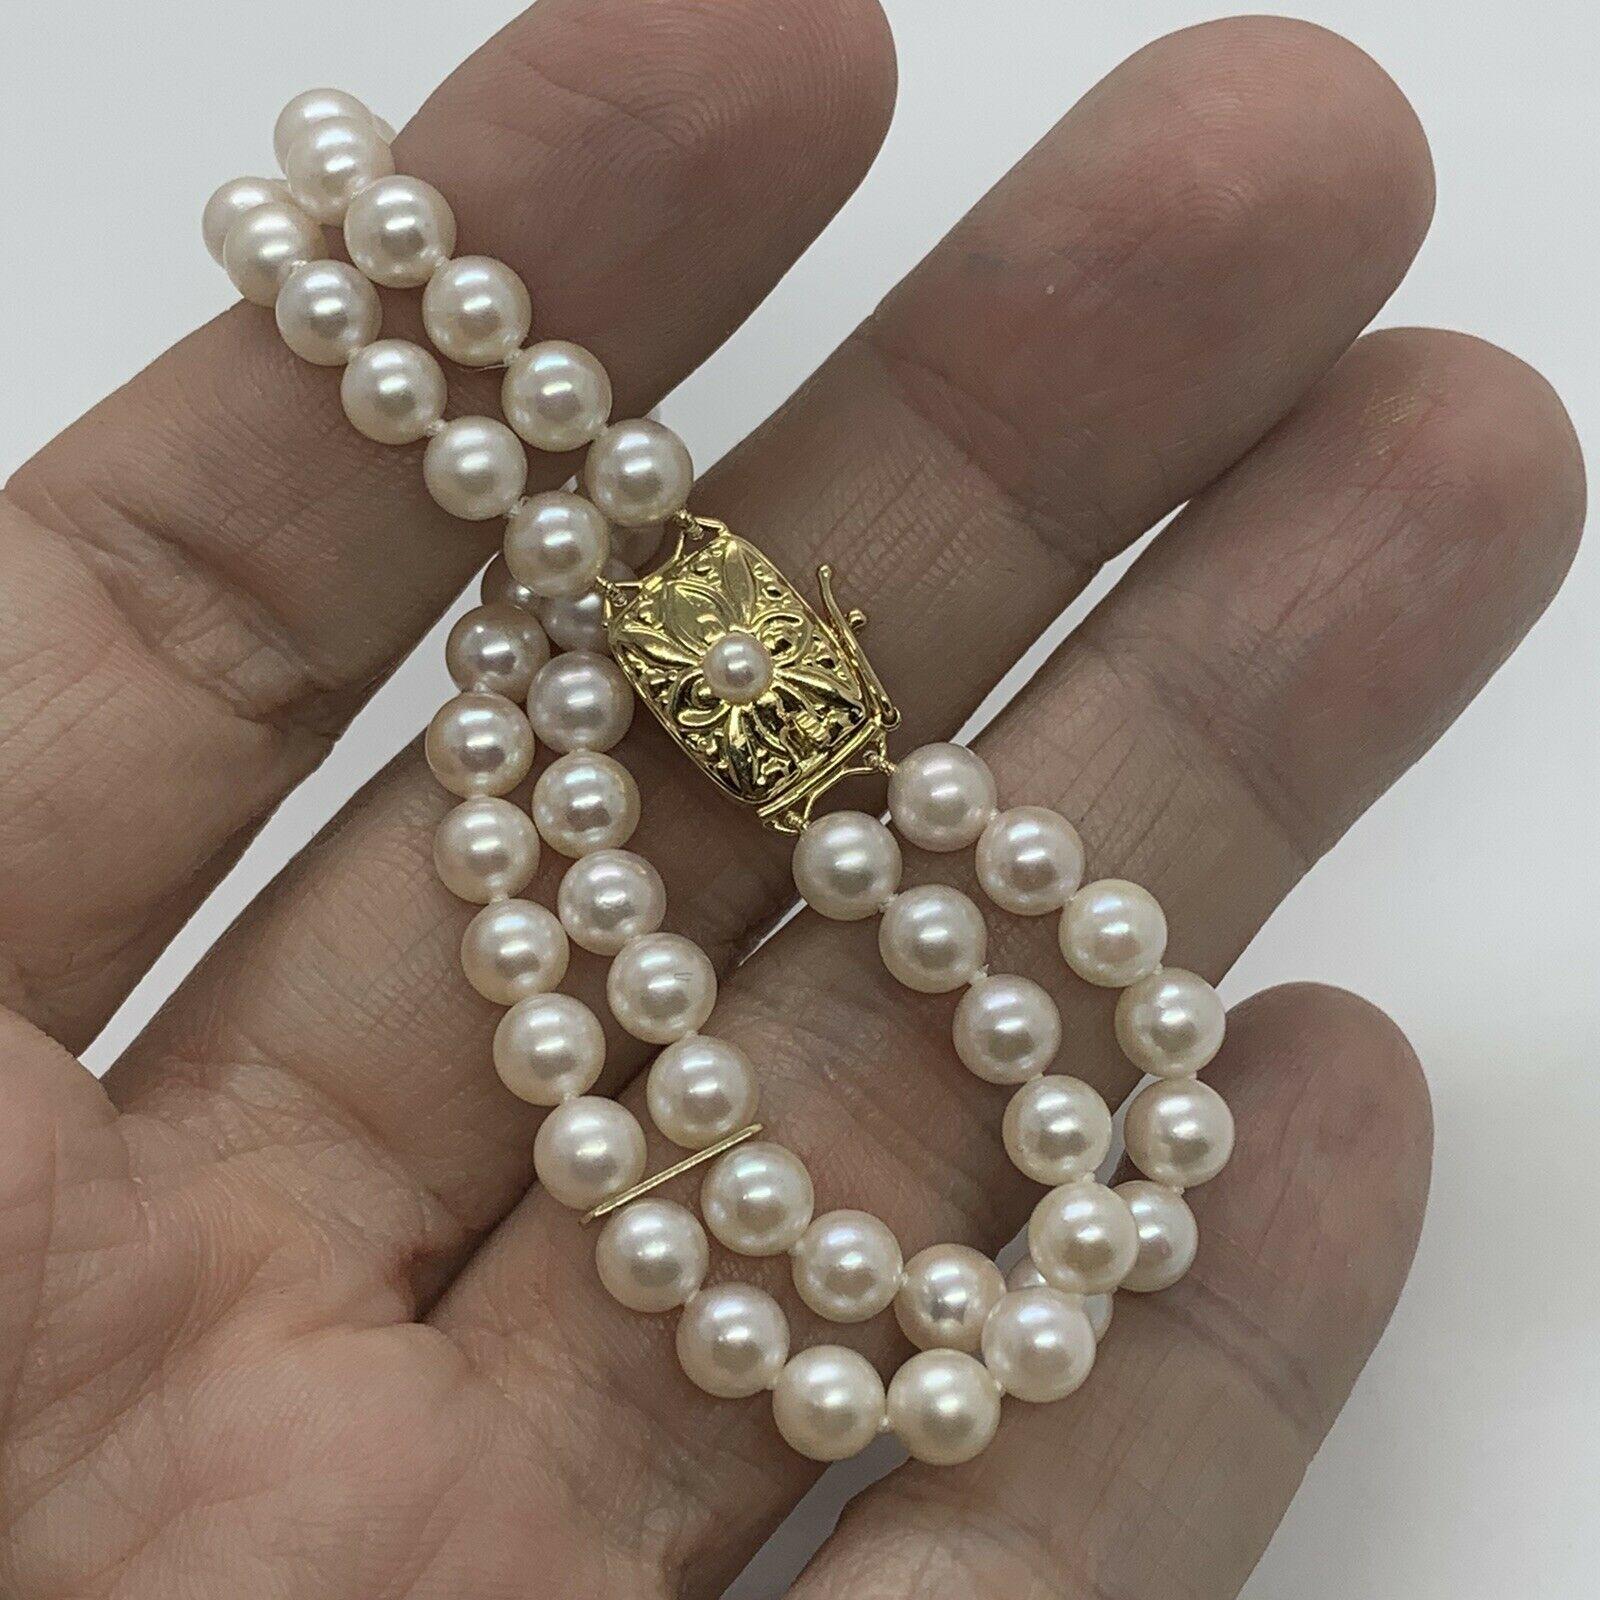 CERTIFIED Estate Mikimoto $3,950 5.40-5.50 MM Double Strand Akoya Pearl Bracelet With a Length of 7 Inches with an 18 KT Gold Clasp
Nothing says, “I Love ❤️ you” more than Diamonds and Pearls‼️
This GLAMOROUS piece of jewelry has been certified and